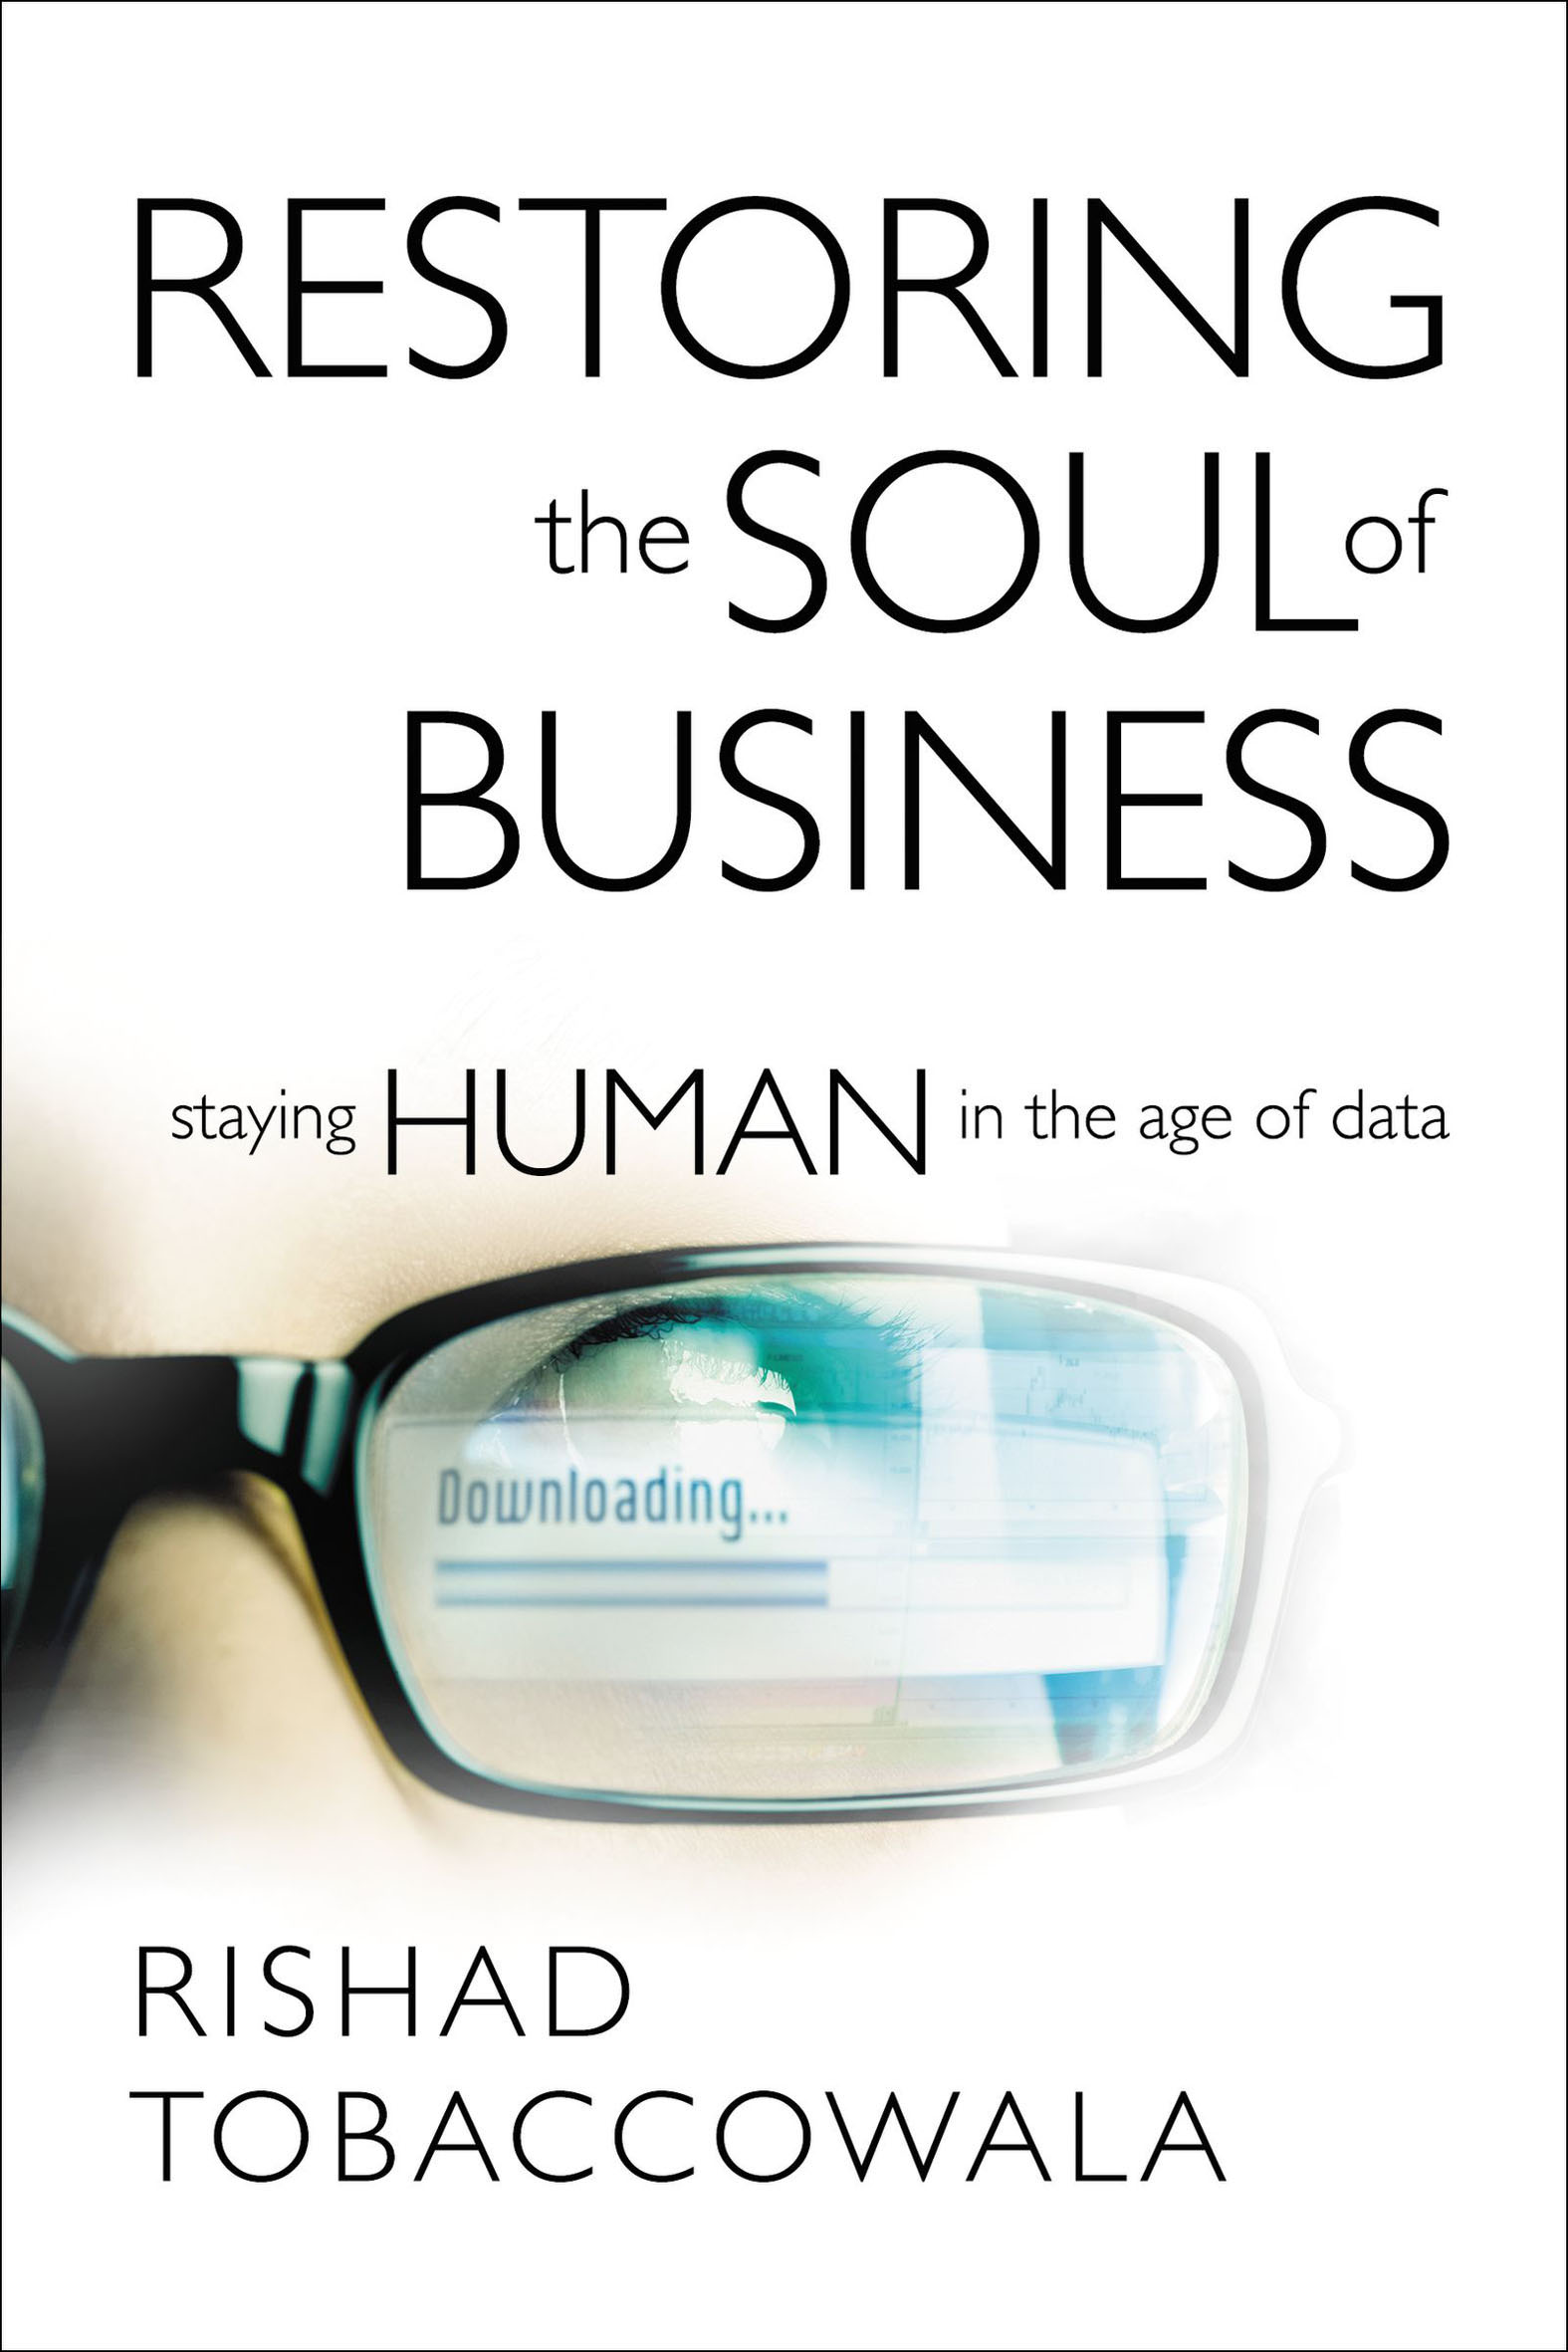 The restoring the soul of business cover image